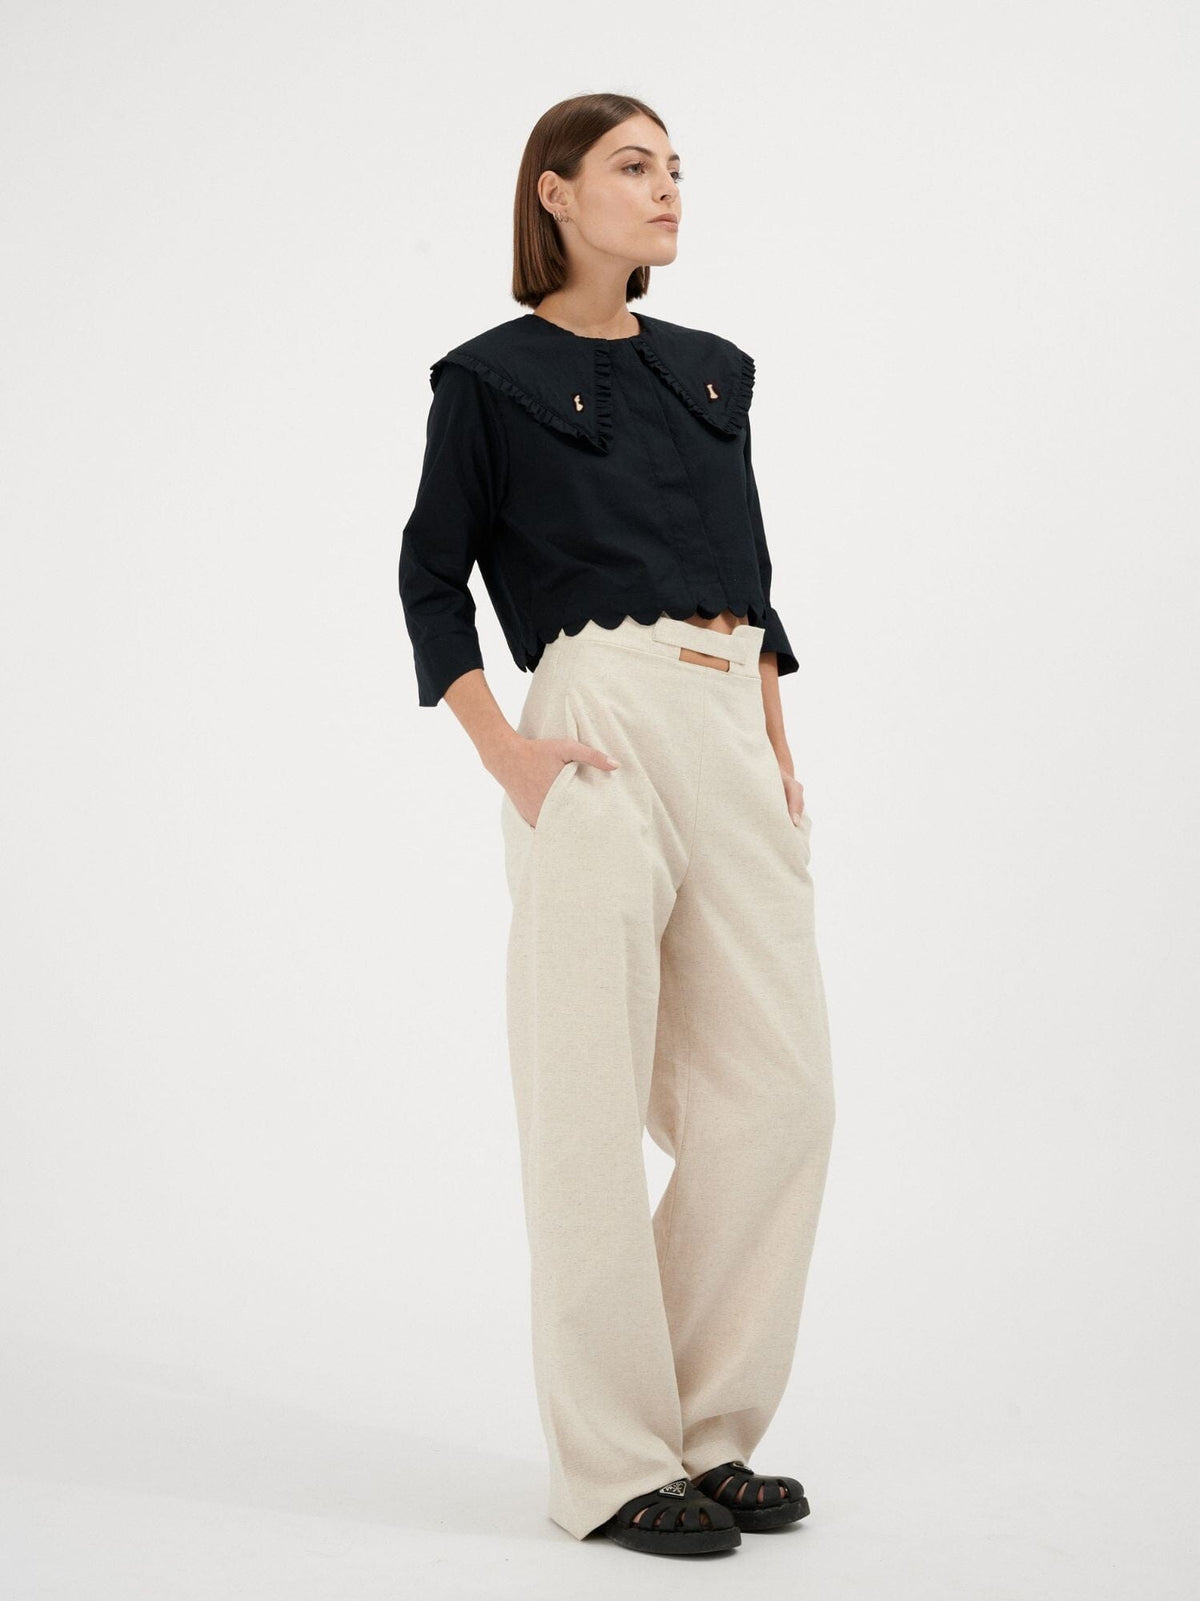 ANTOINETTE - Cropped shirt with oversized claudine collar embroidered in Cotton black Shirt Fête Impériale